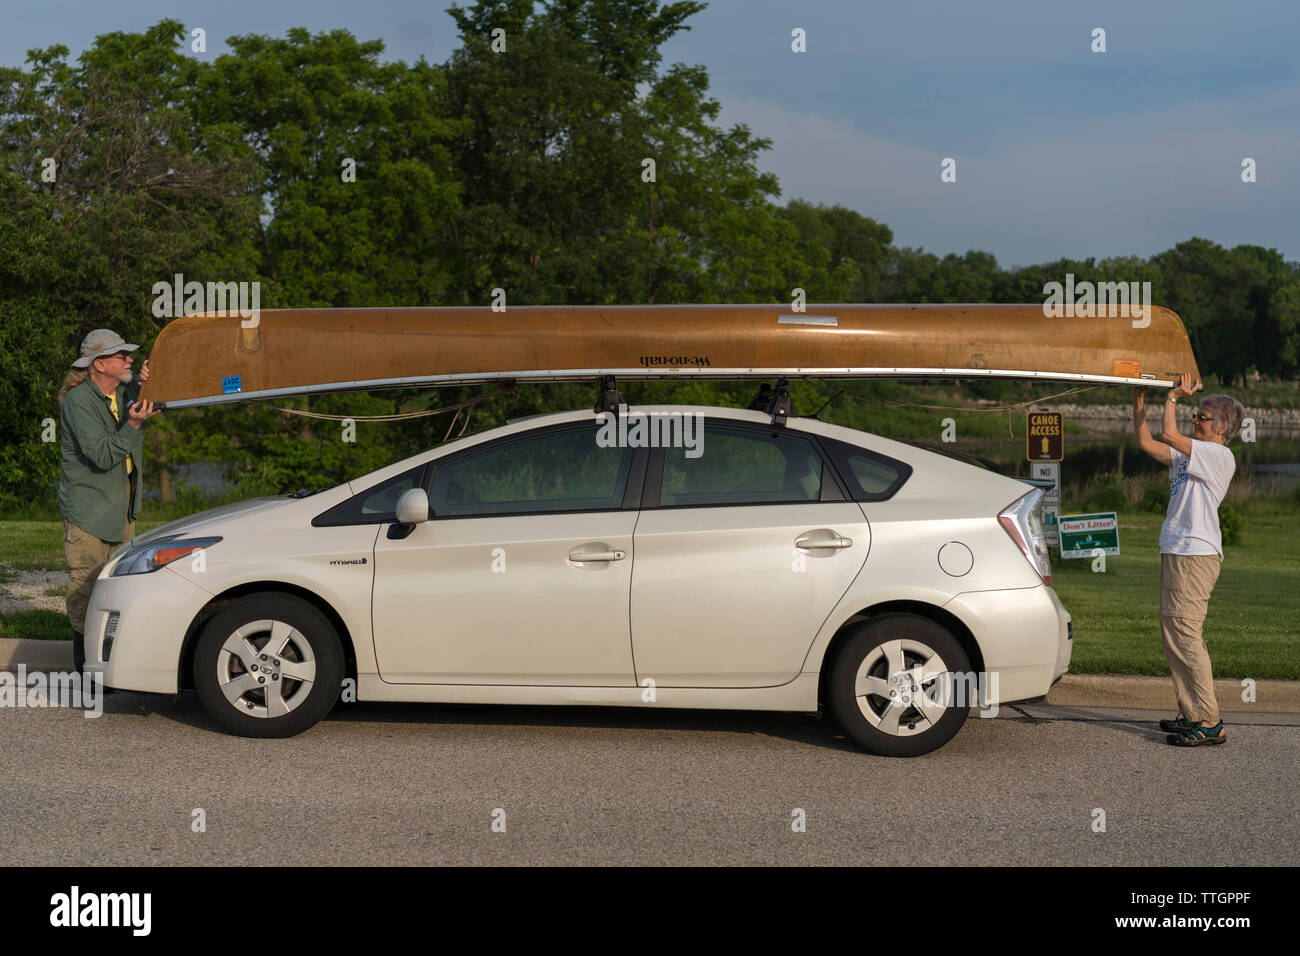 Couple puts a Canoe on Their Prius after boating the Milwaukee River Stock Photo